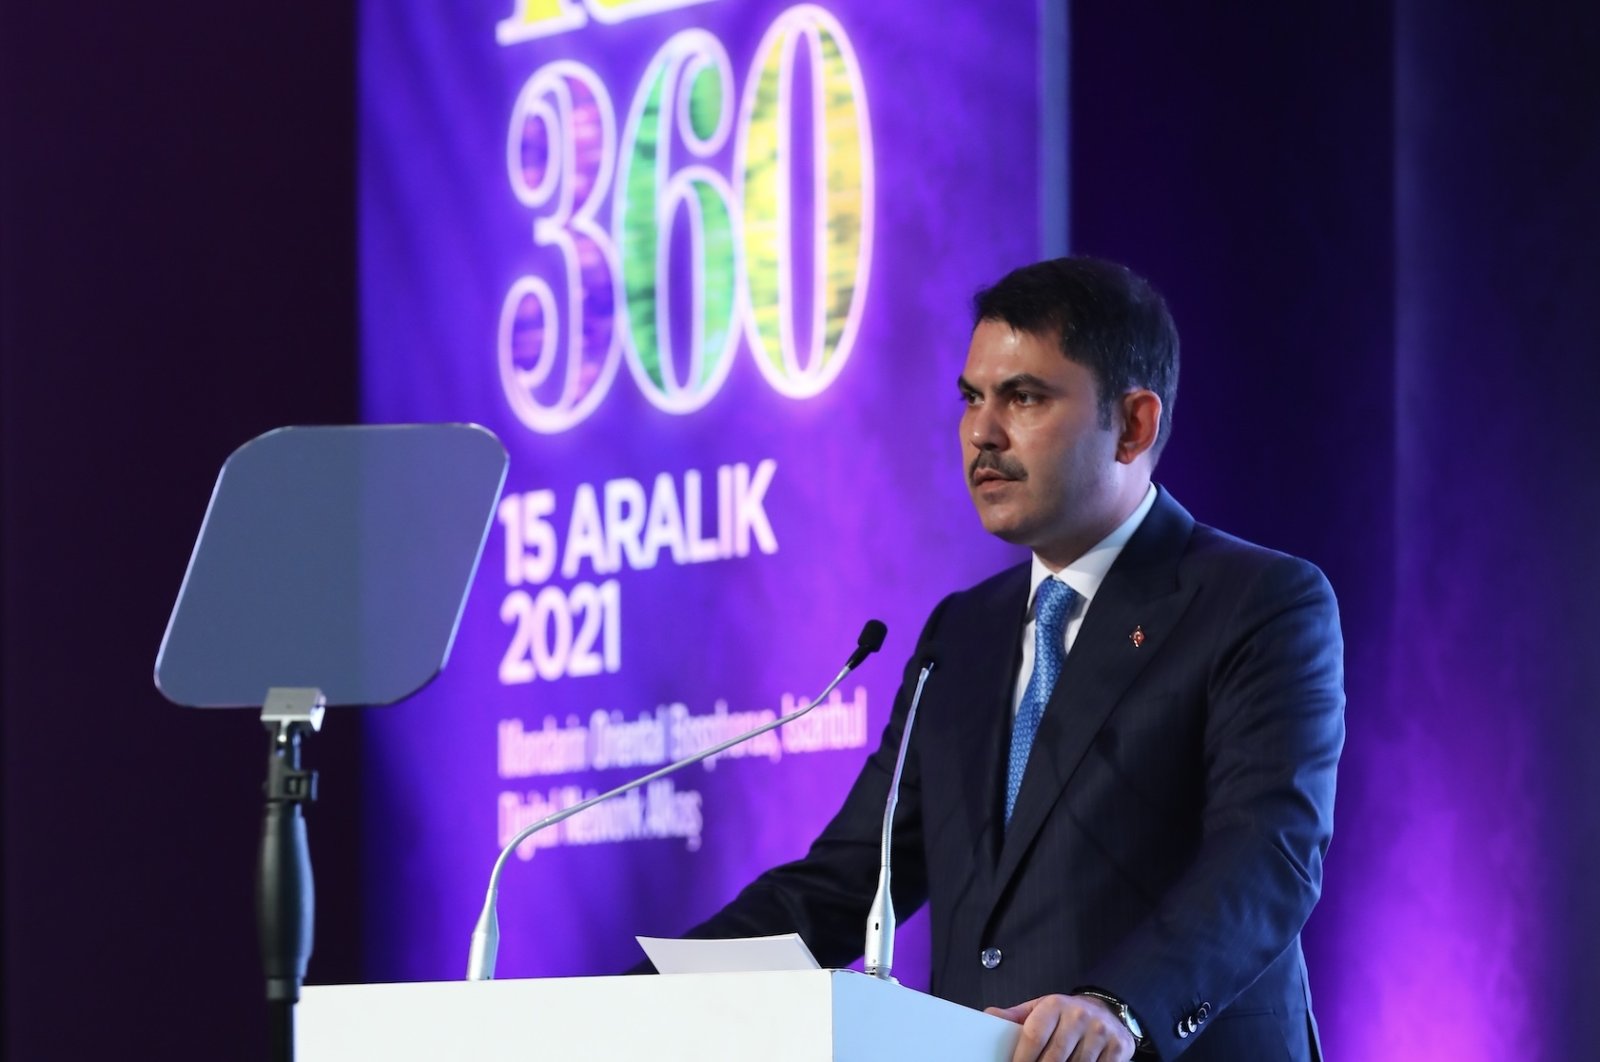 Environment and Urban Planning Minister Murat Kurum speaks at RE360 event held in Istanbul, Turkey, Dec. 15, 2021. (Courtesy of Alkaş)